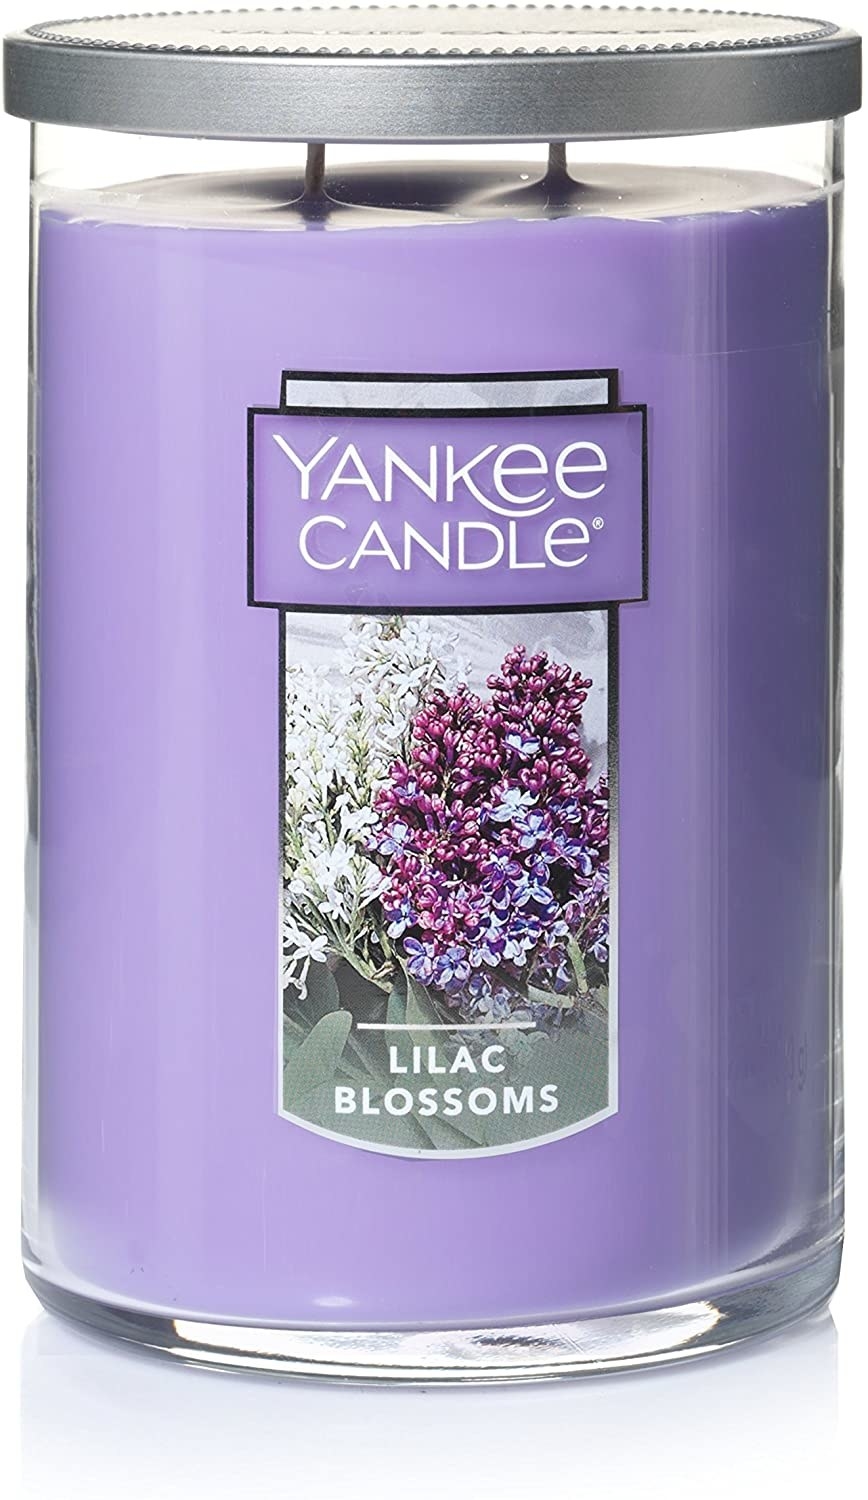 The Yankee Candle in the scent &quot;lilac blossoms&quot; 